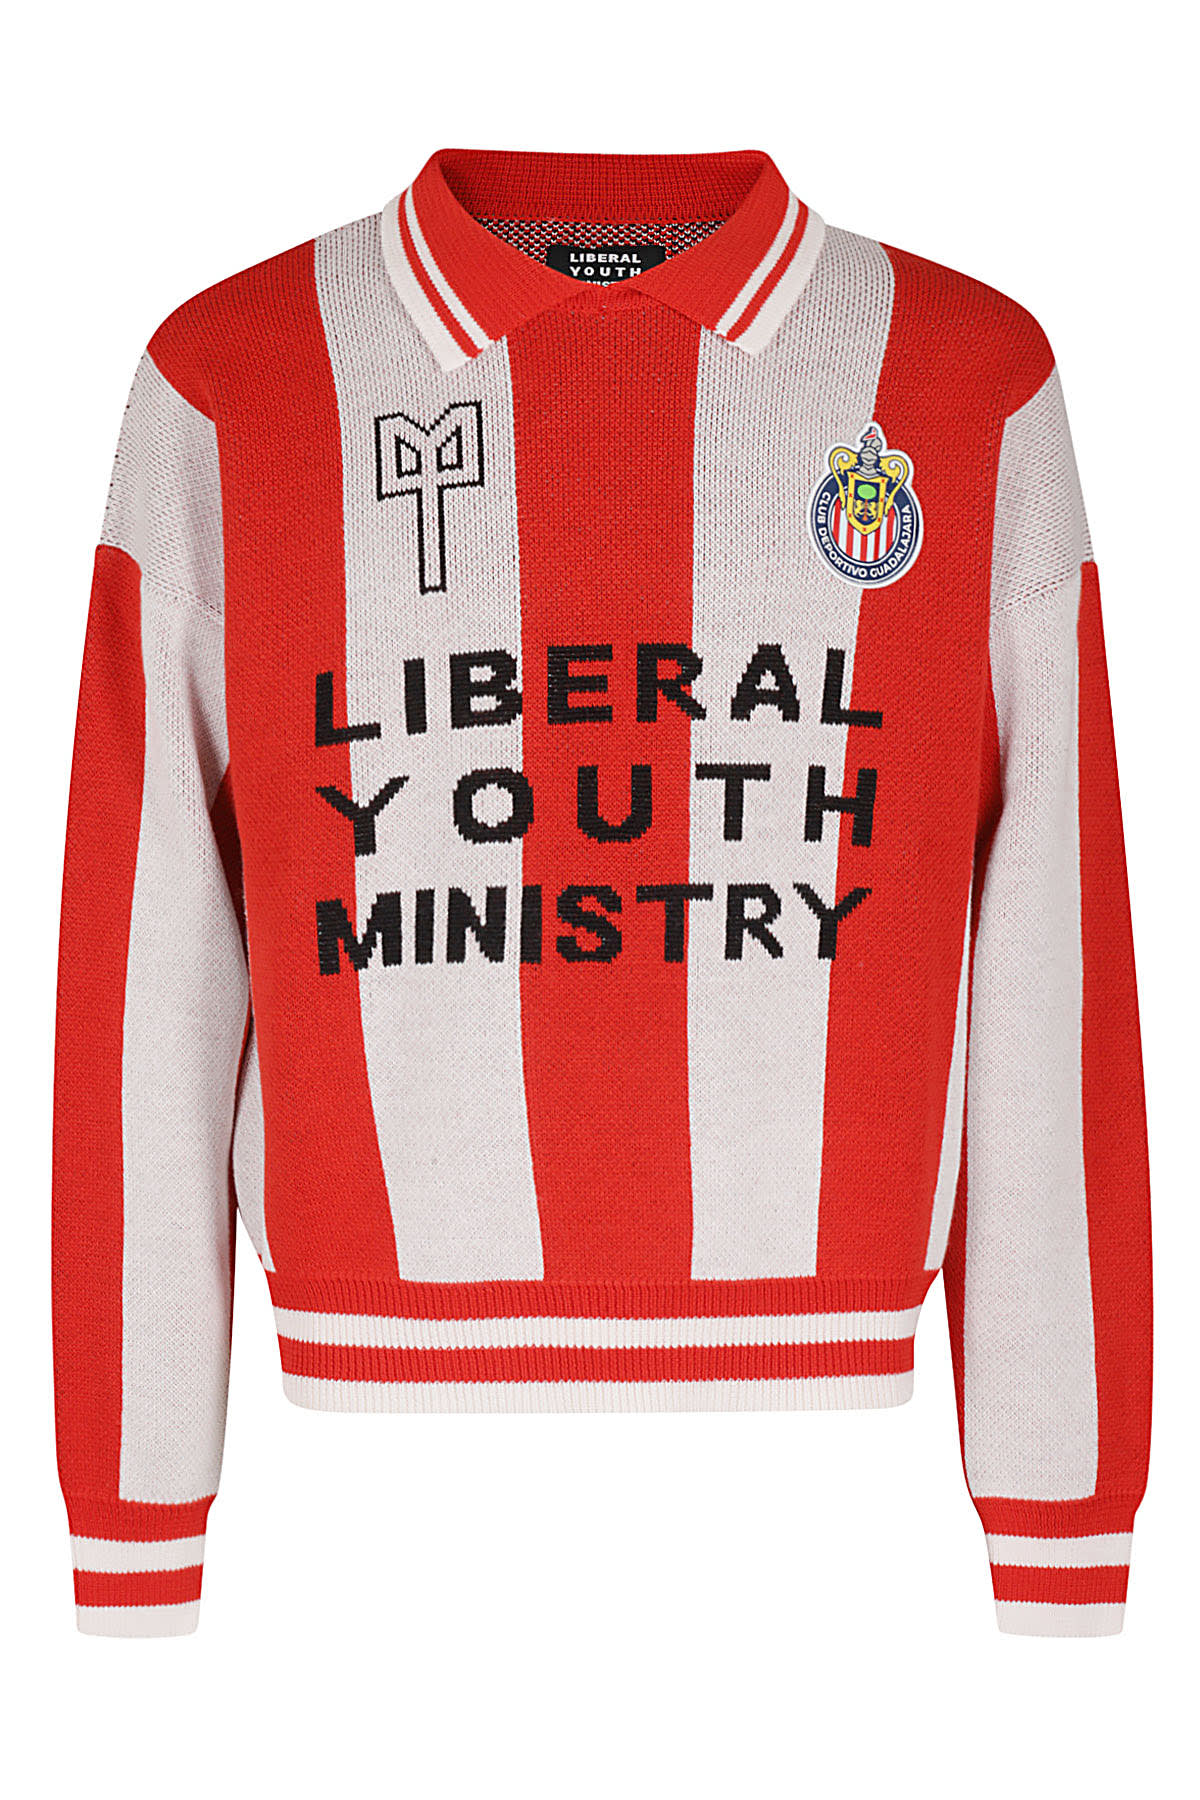 Liberal Youth Ministry 80'S Angels Football Jersey top - multi